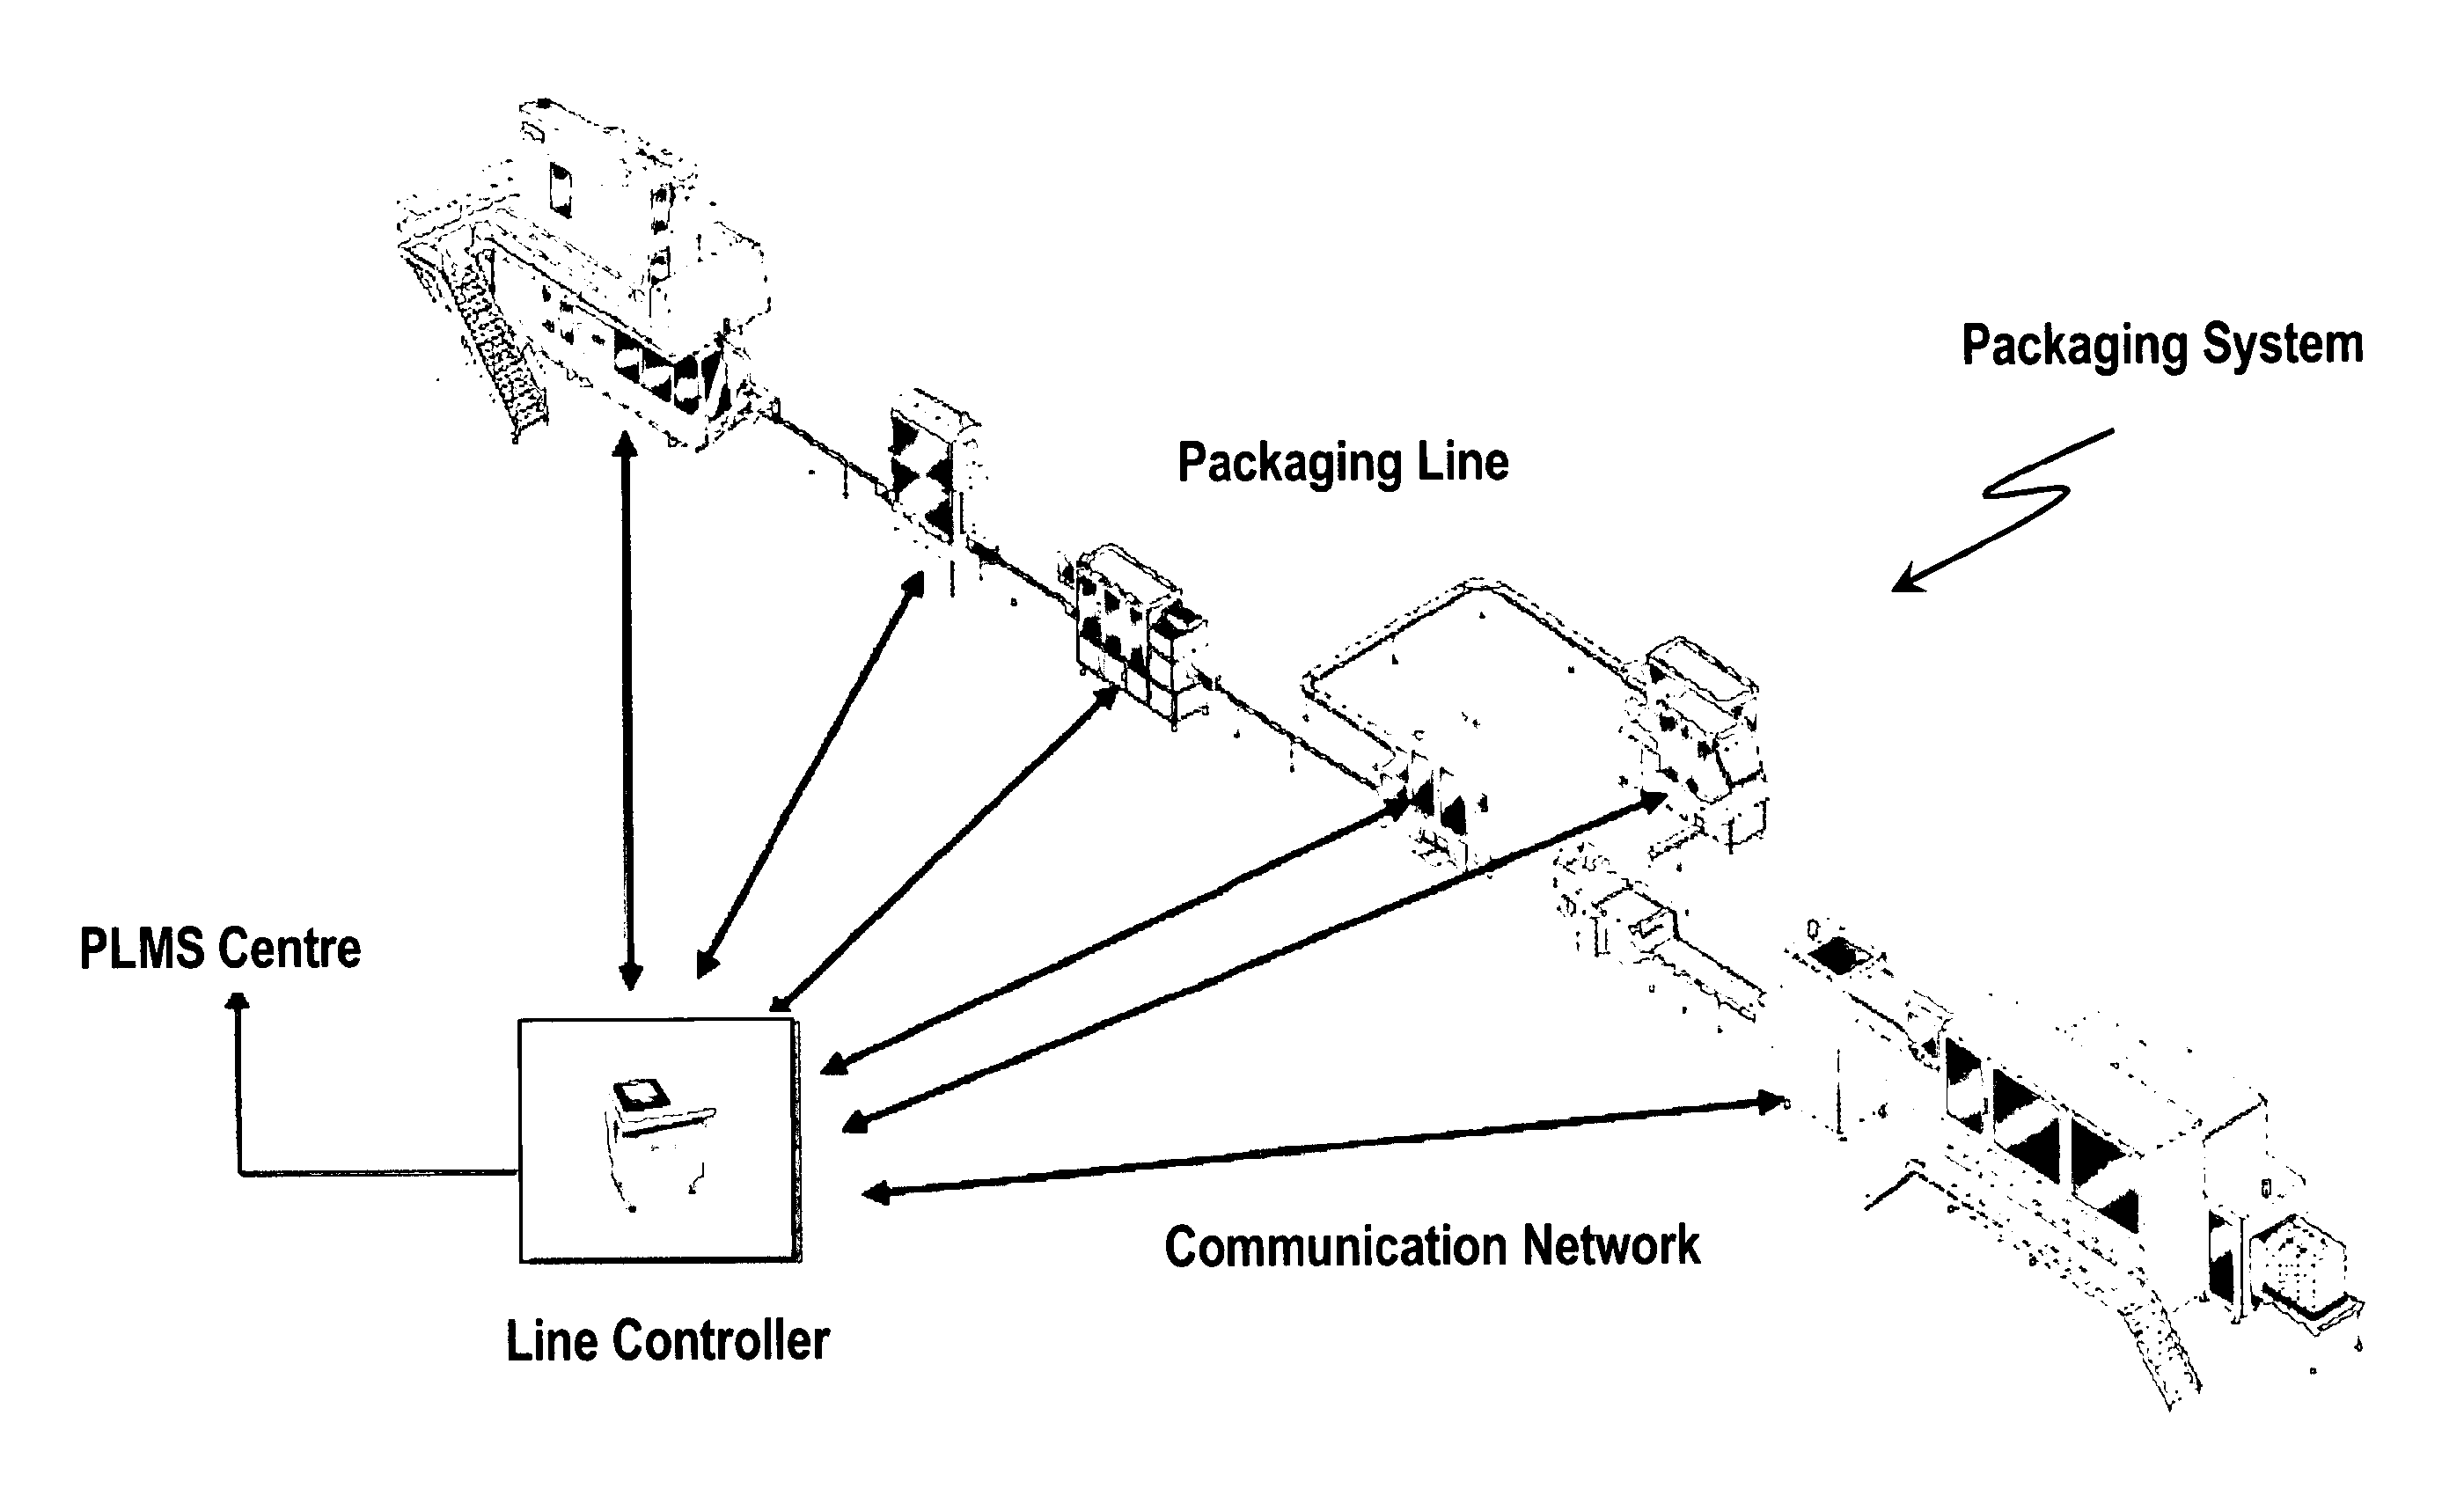 Integrated packaging system architecture